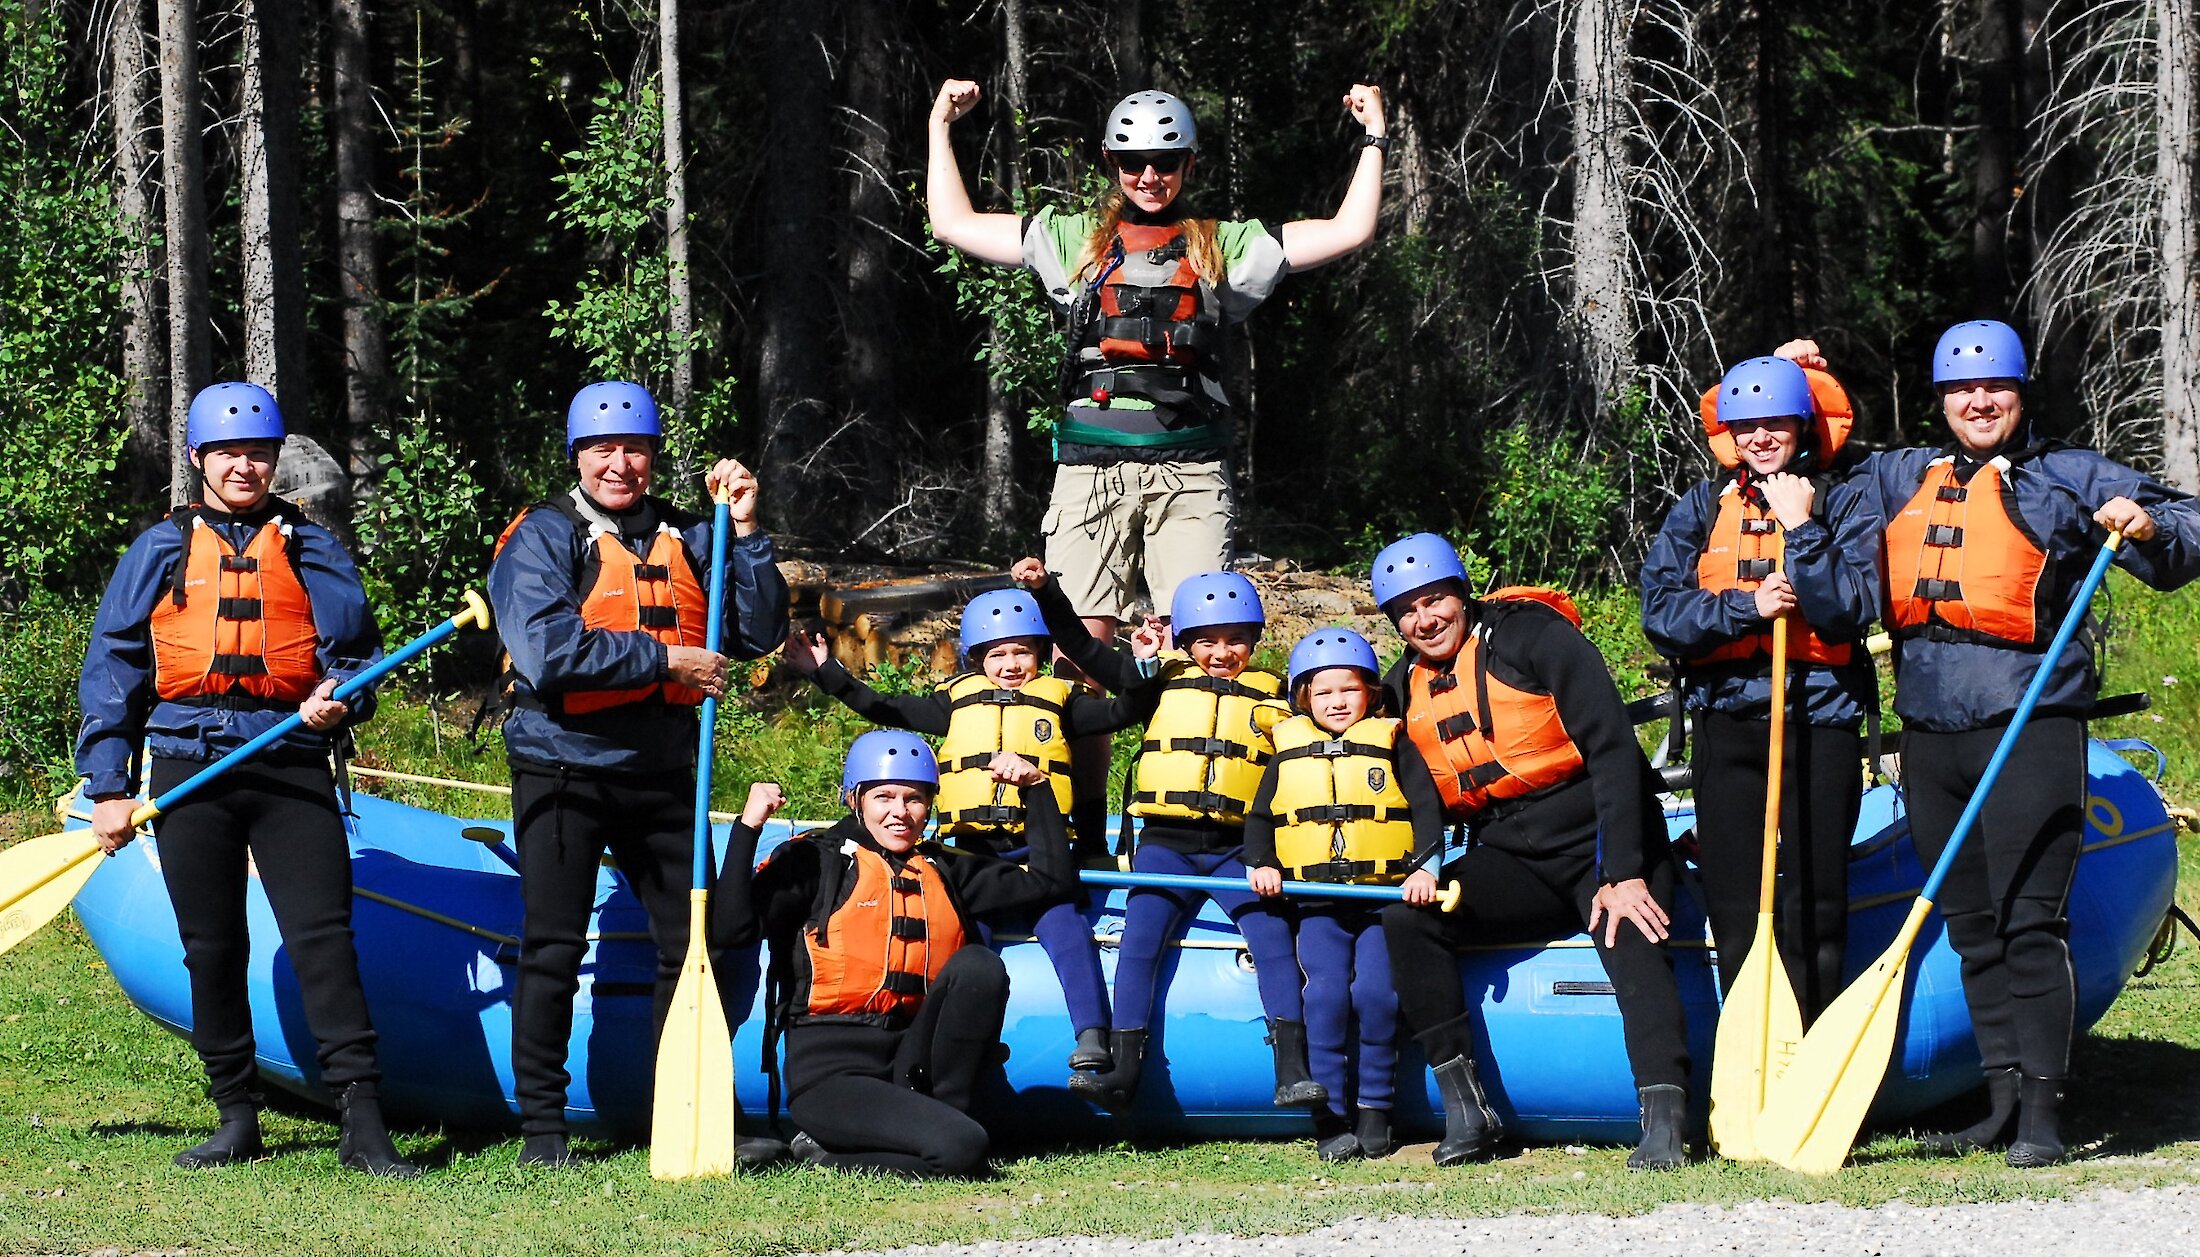 Rafters and guide posing before they hit the rapids